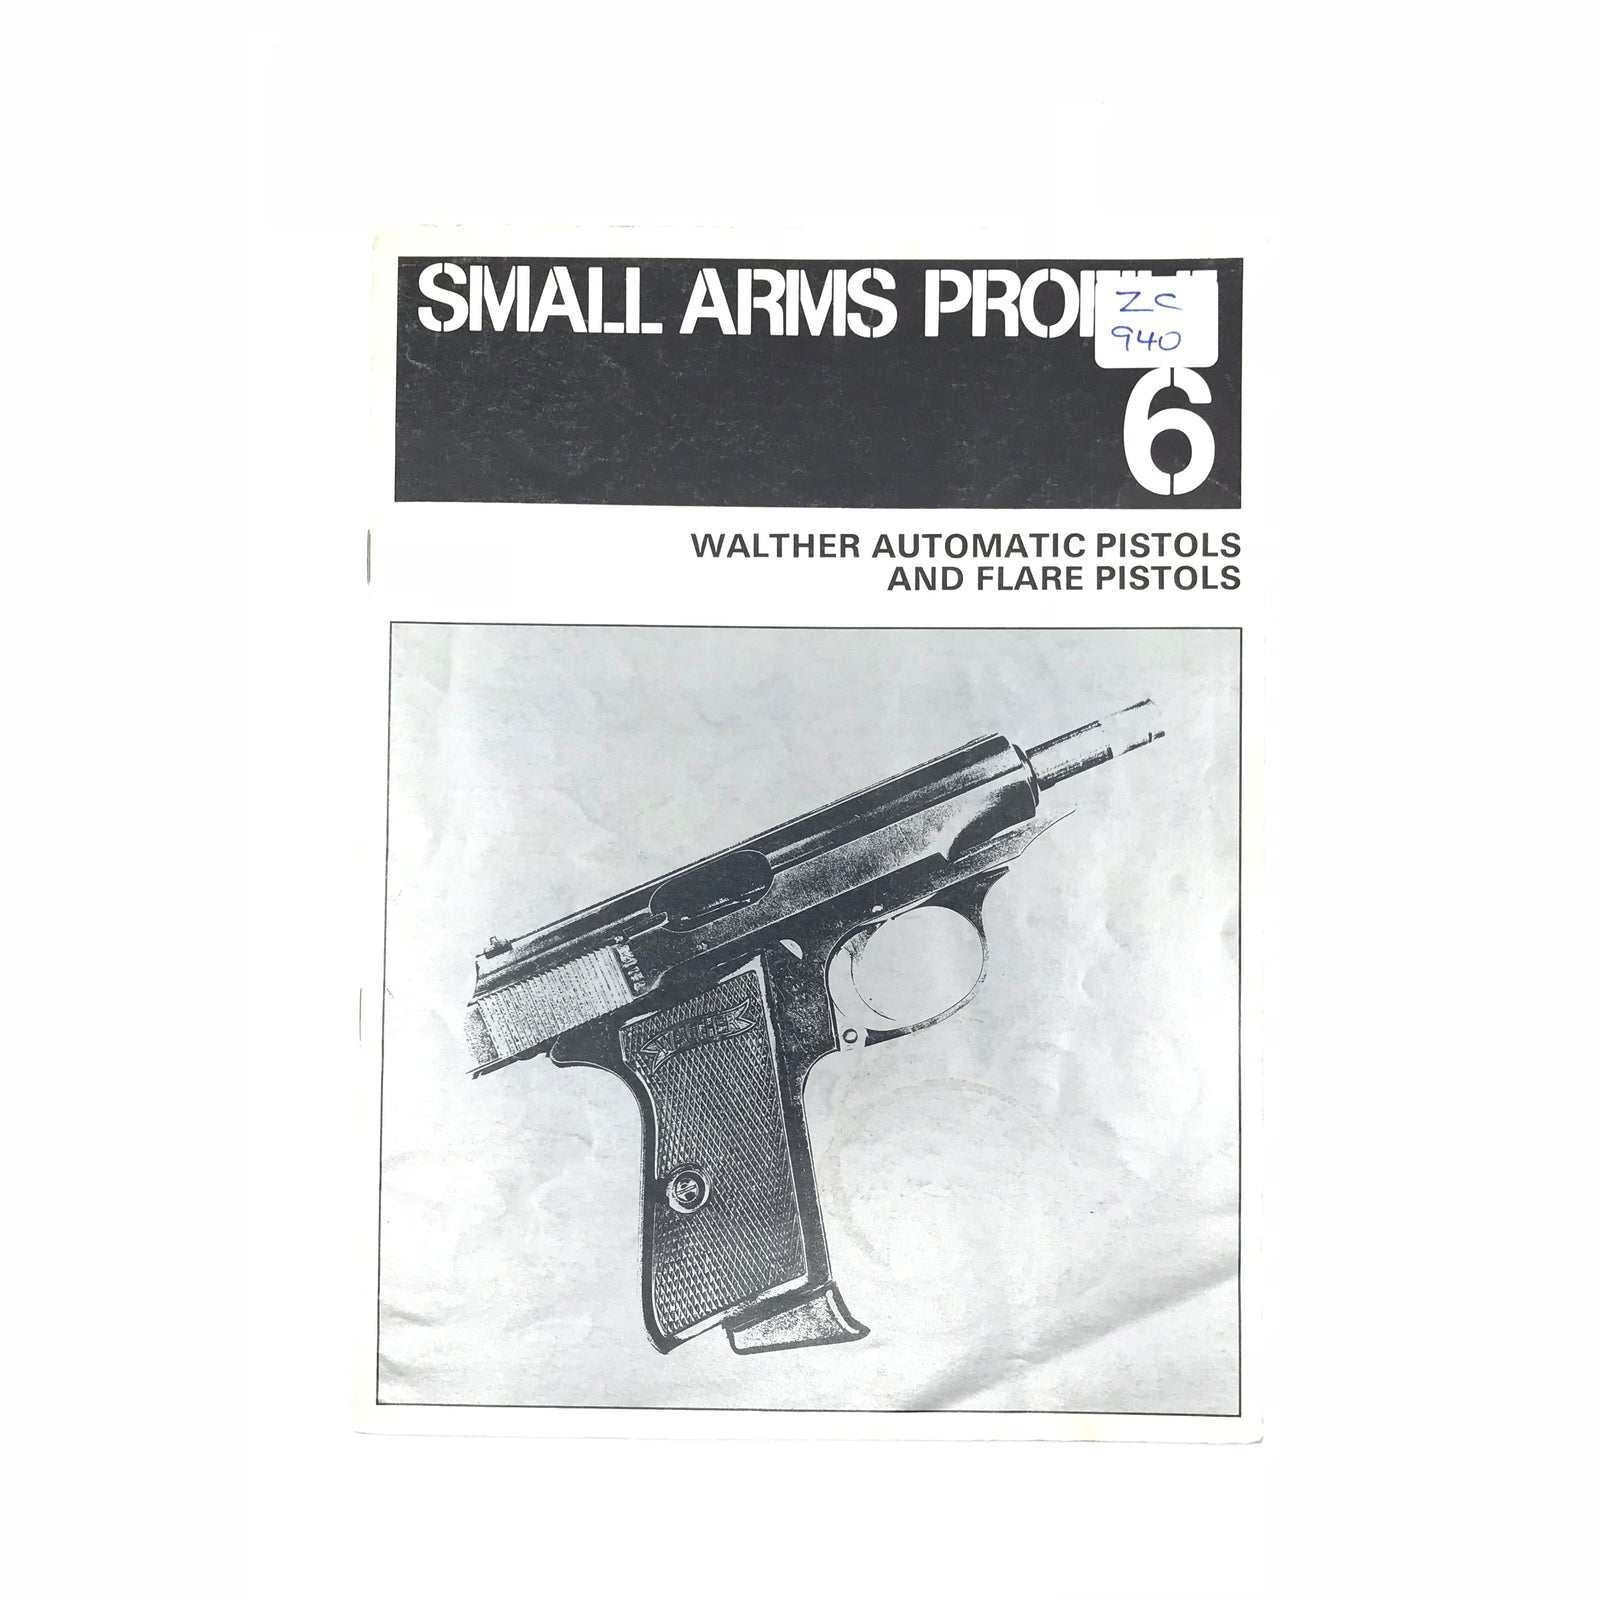 Small Arms Profile 6 Walther Automatic Pistols & Flare Pistols